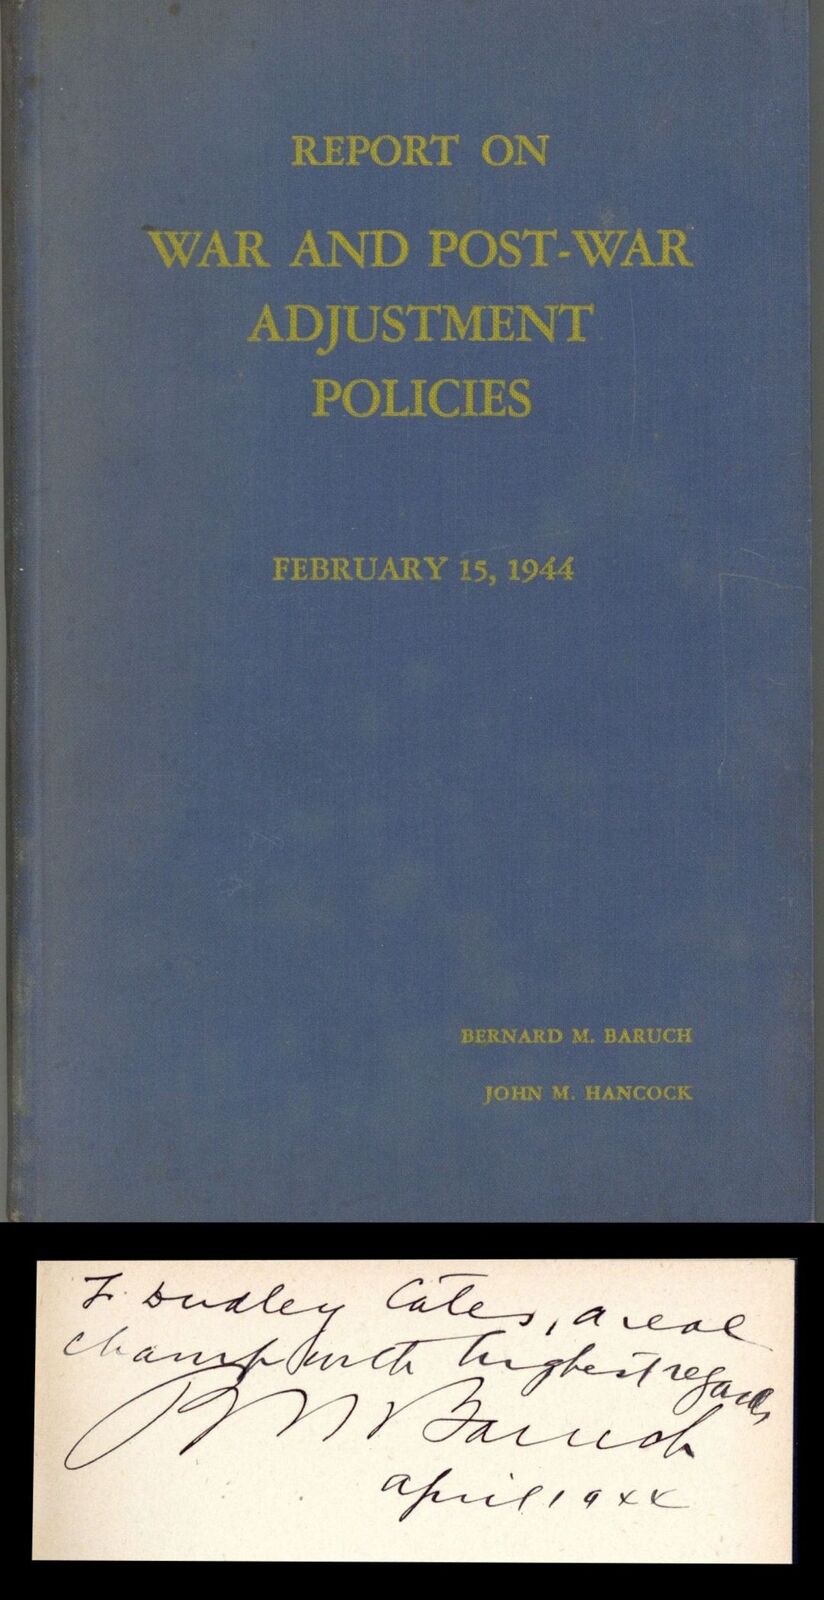 Report on War and Post-War Adjustment Policies signed by Bernard M. Baruch - Aut